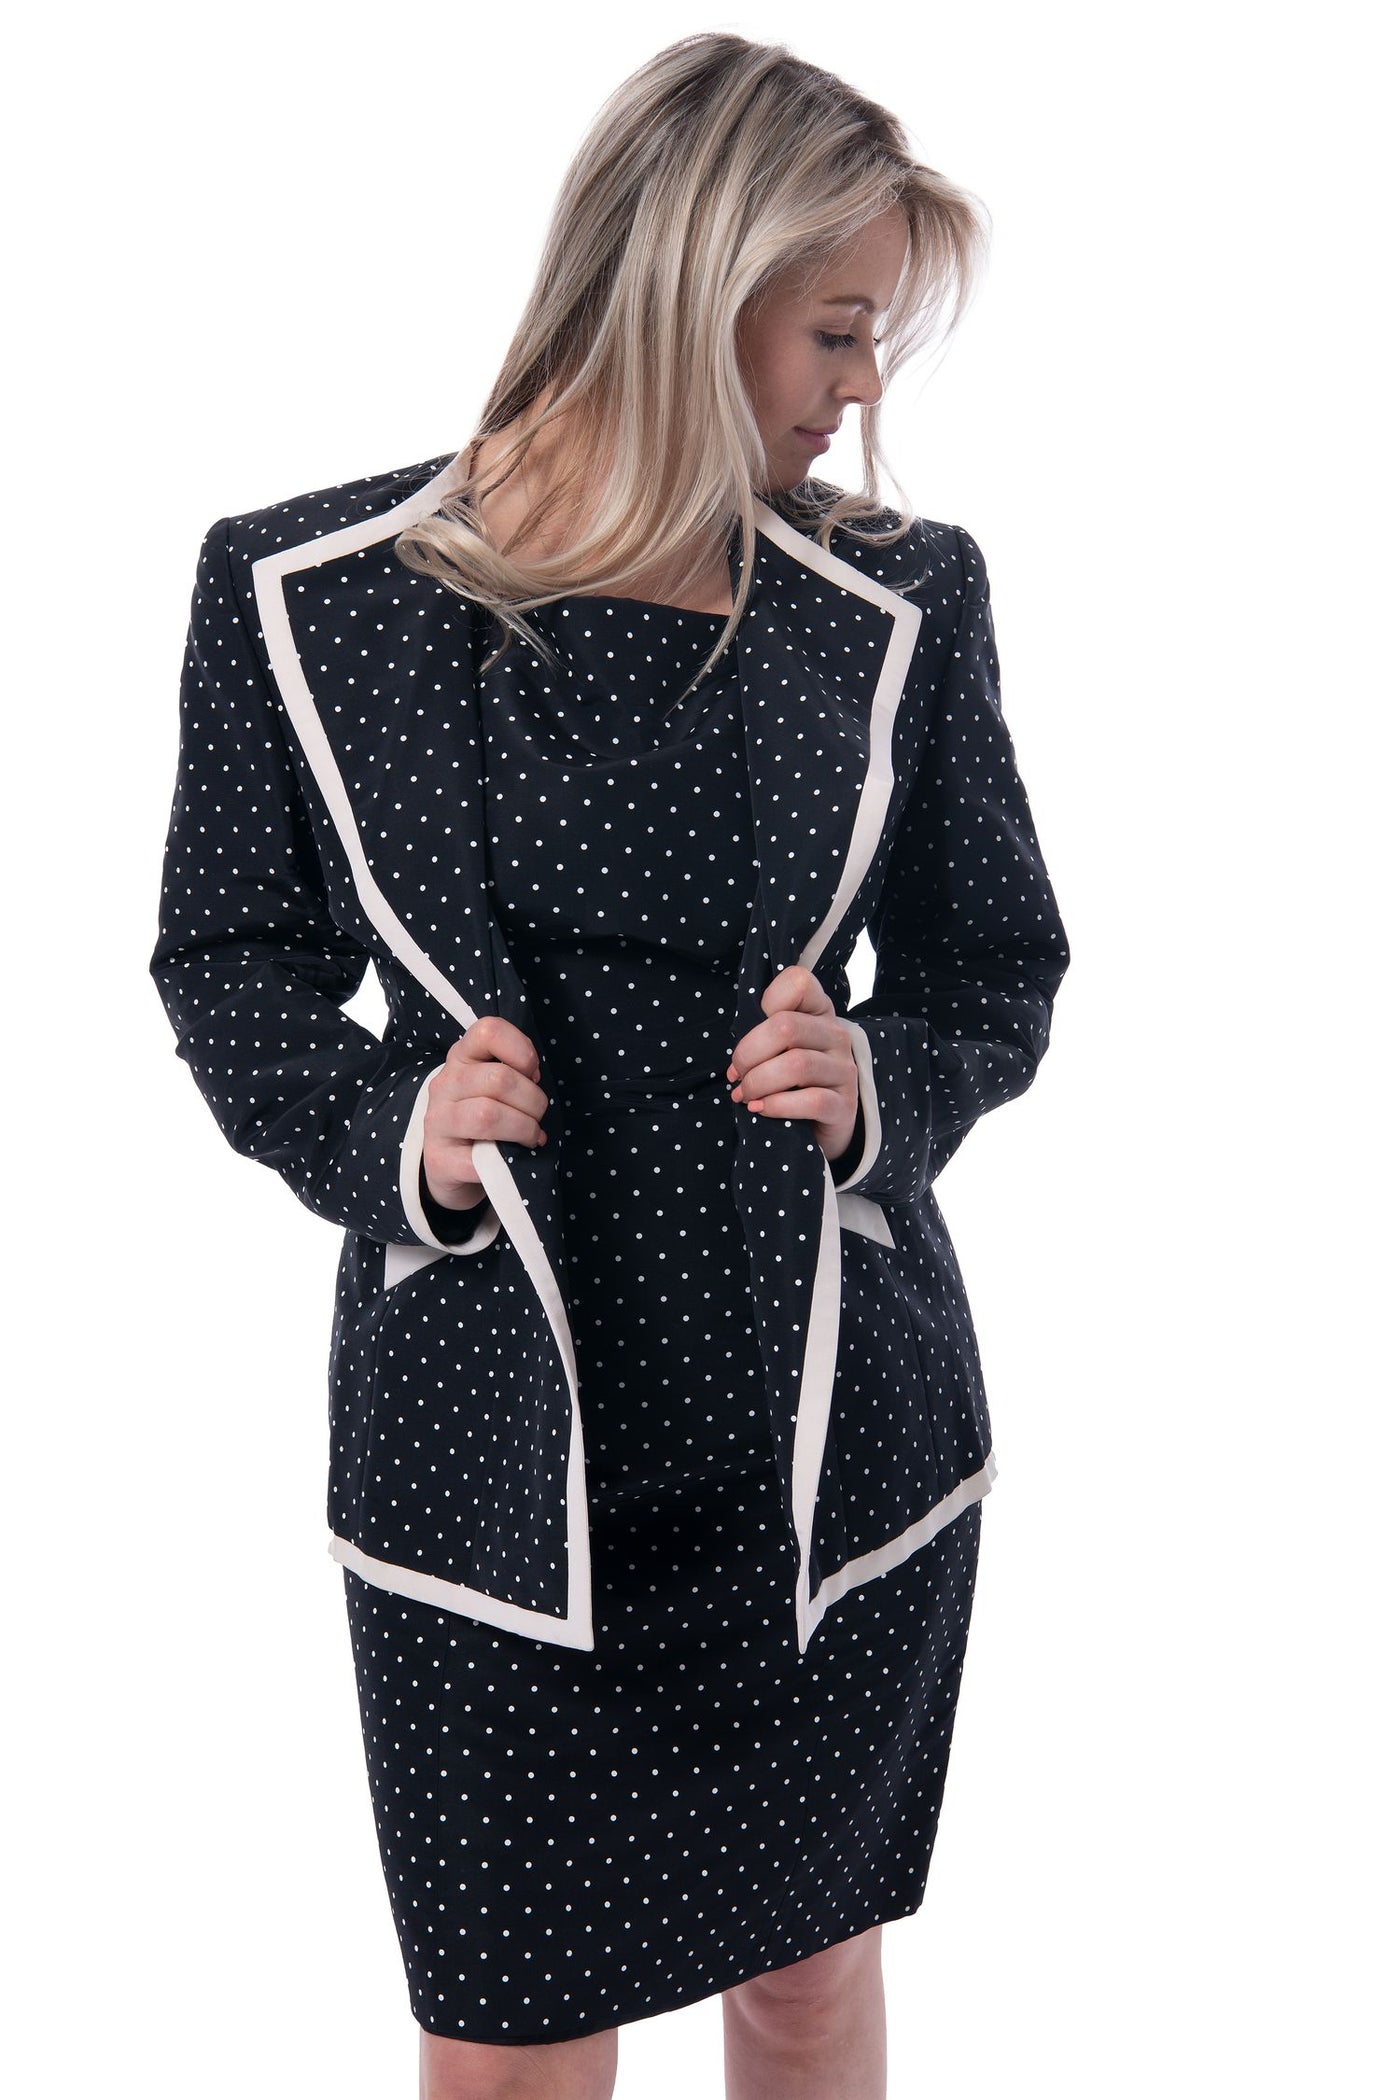 Escada Couture vintage two piece dress and jacket, black and white polka dot